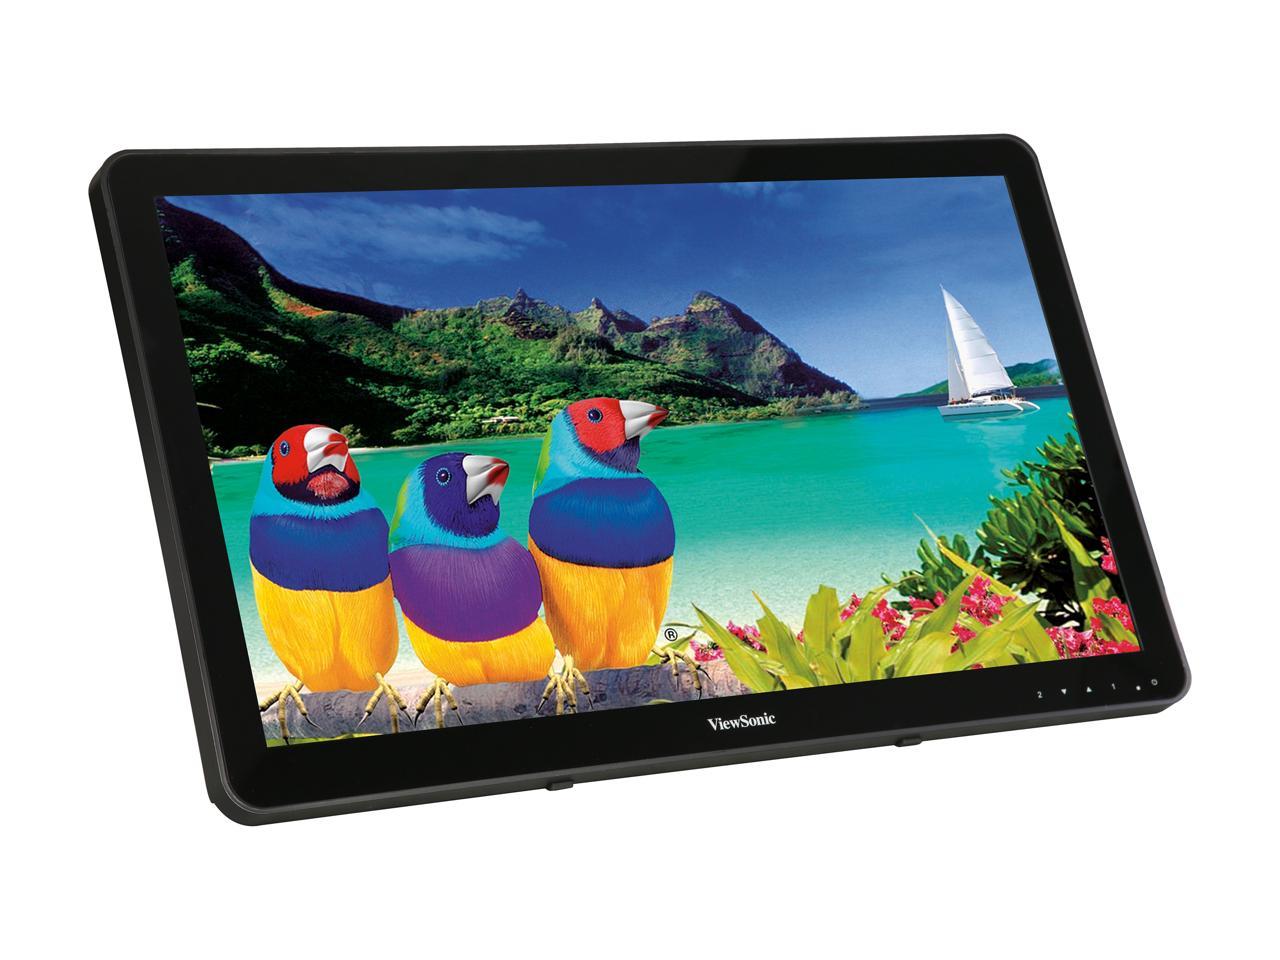 ViewSonic TD2430 24" Touch Monitor, 1920 x 1080, 50,000,000:1 Contract Ratio, 250cd/m2, 10-point Multi-touch, 178/178 Ultra-wide Viewing Angles, DisplayPort, HDMI&VGA, Build-in Speaker